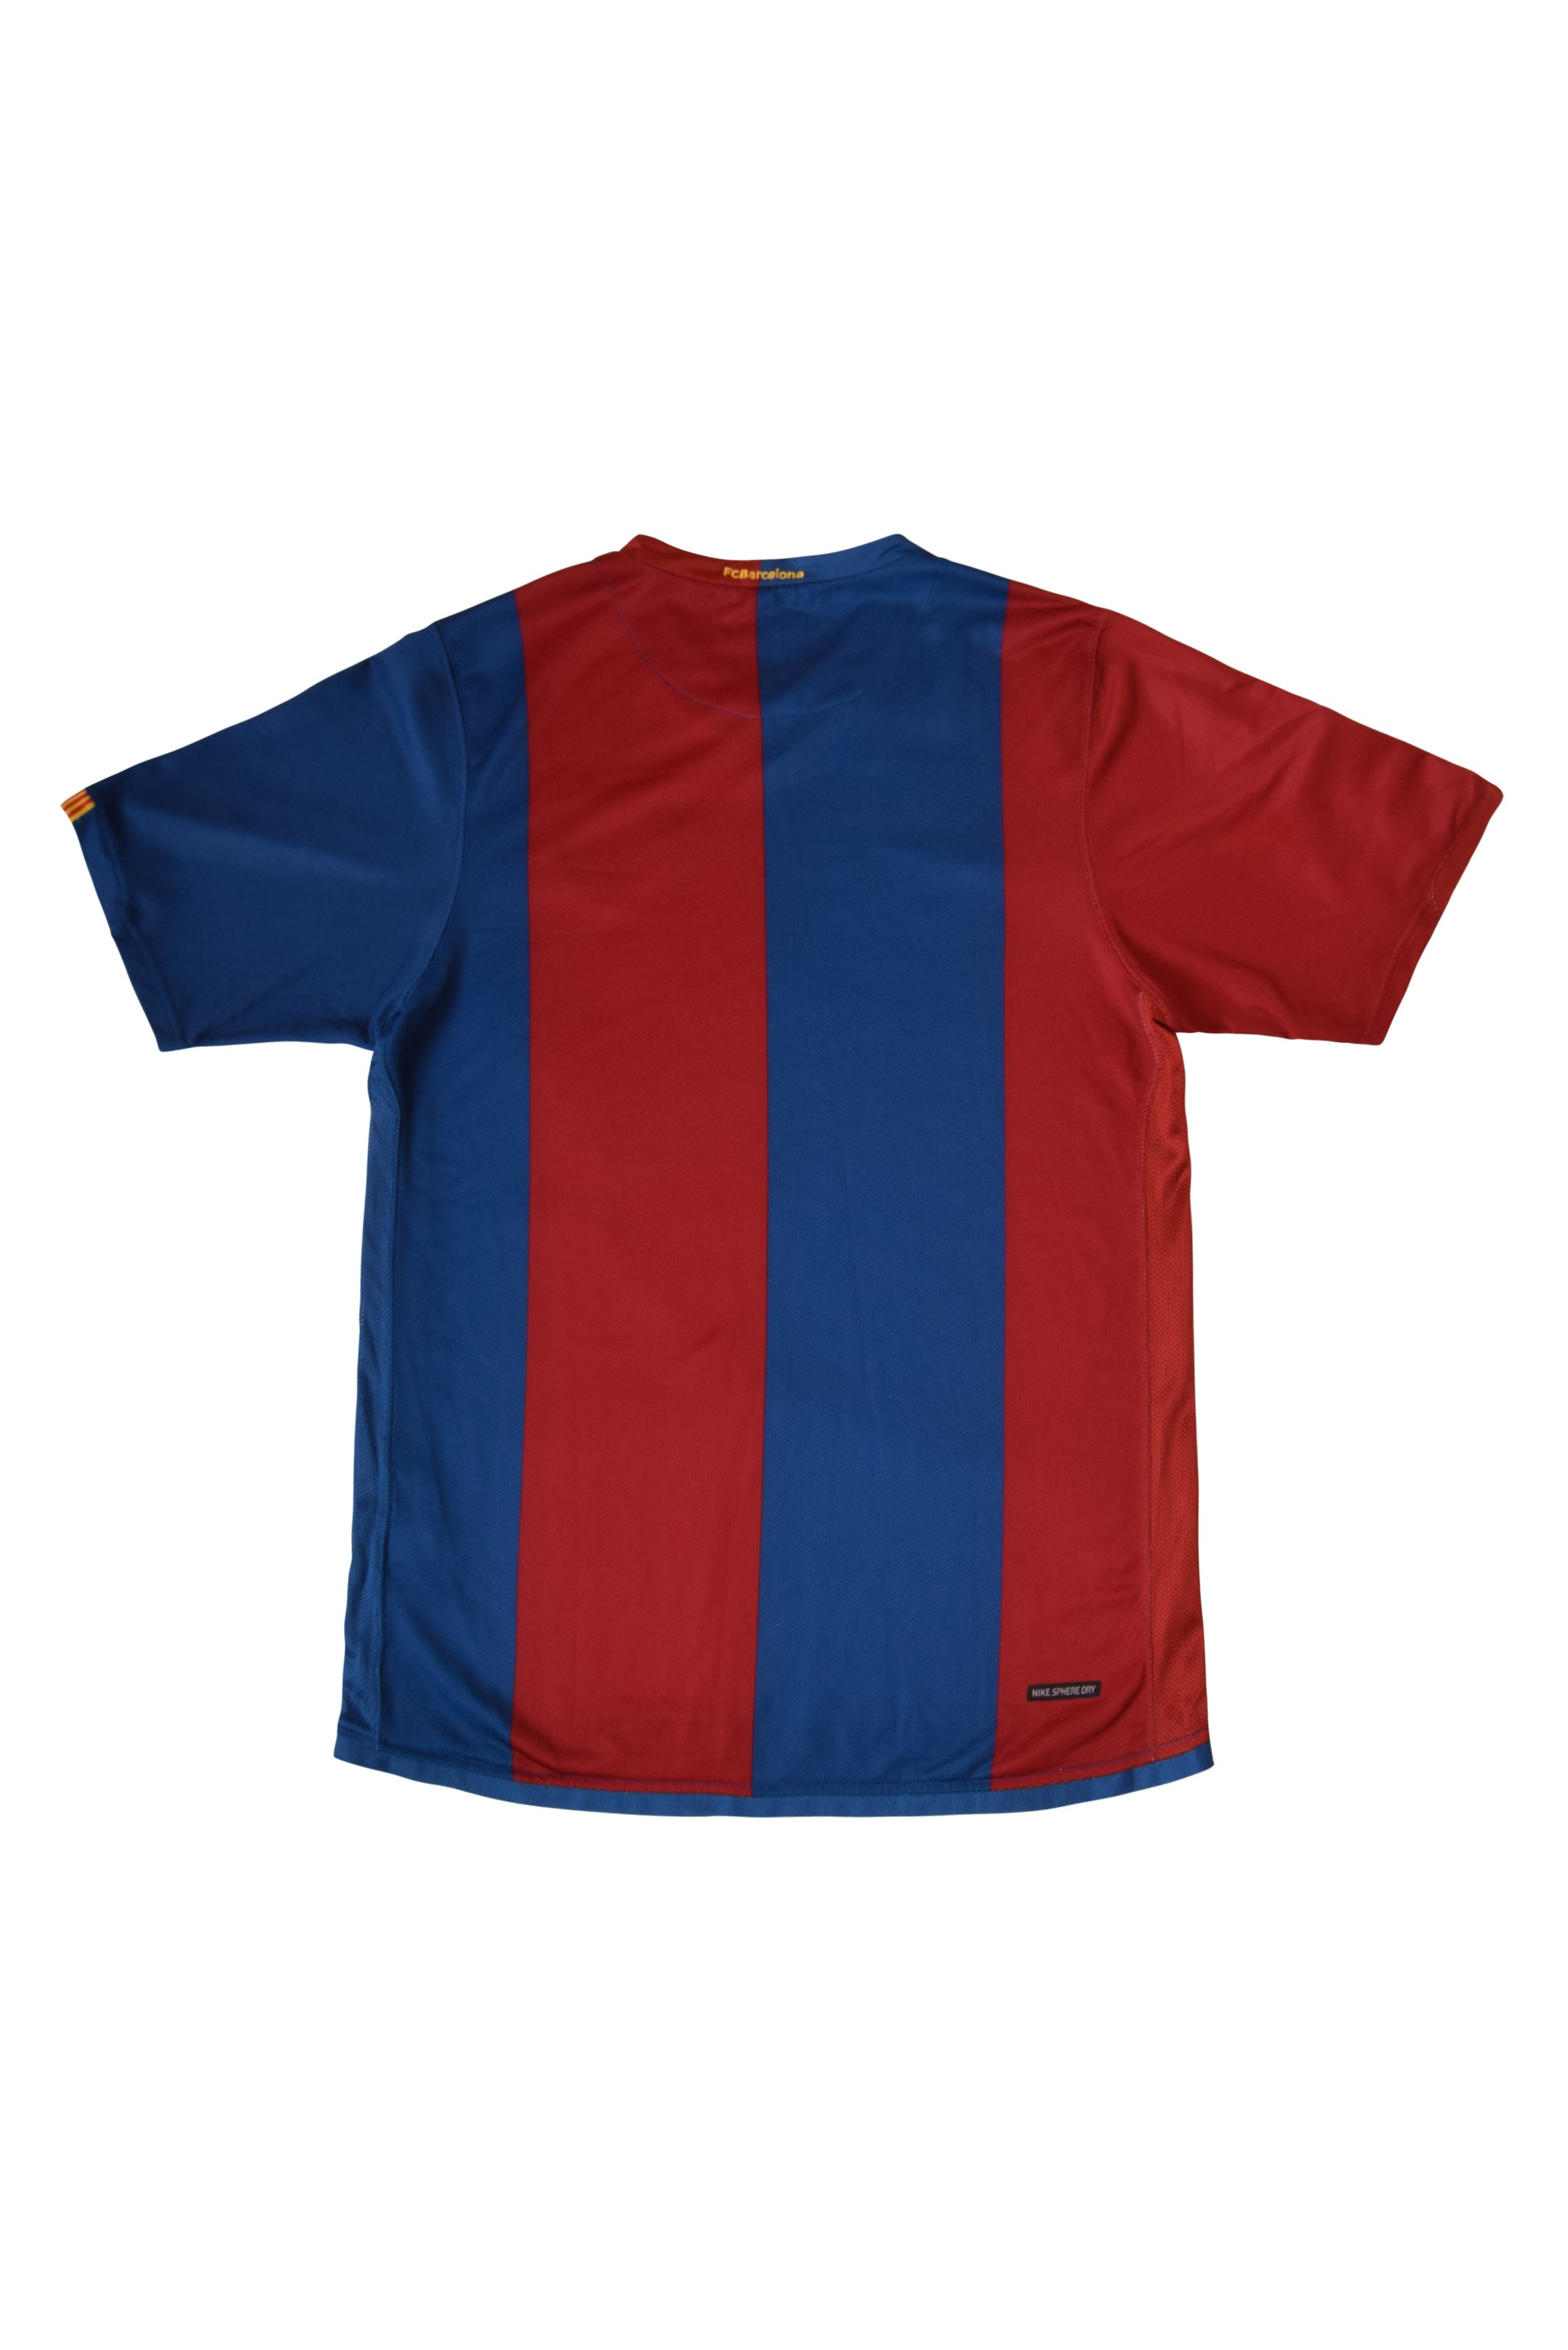 FC Barcelona Nike Home Football Shirt Size M Red Blue Sphere Dry